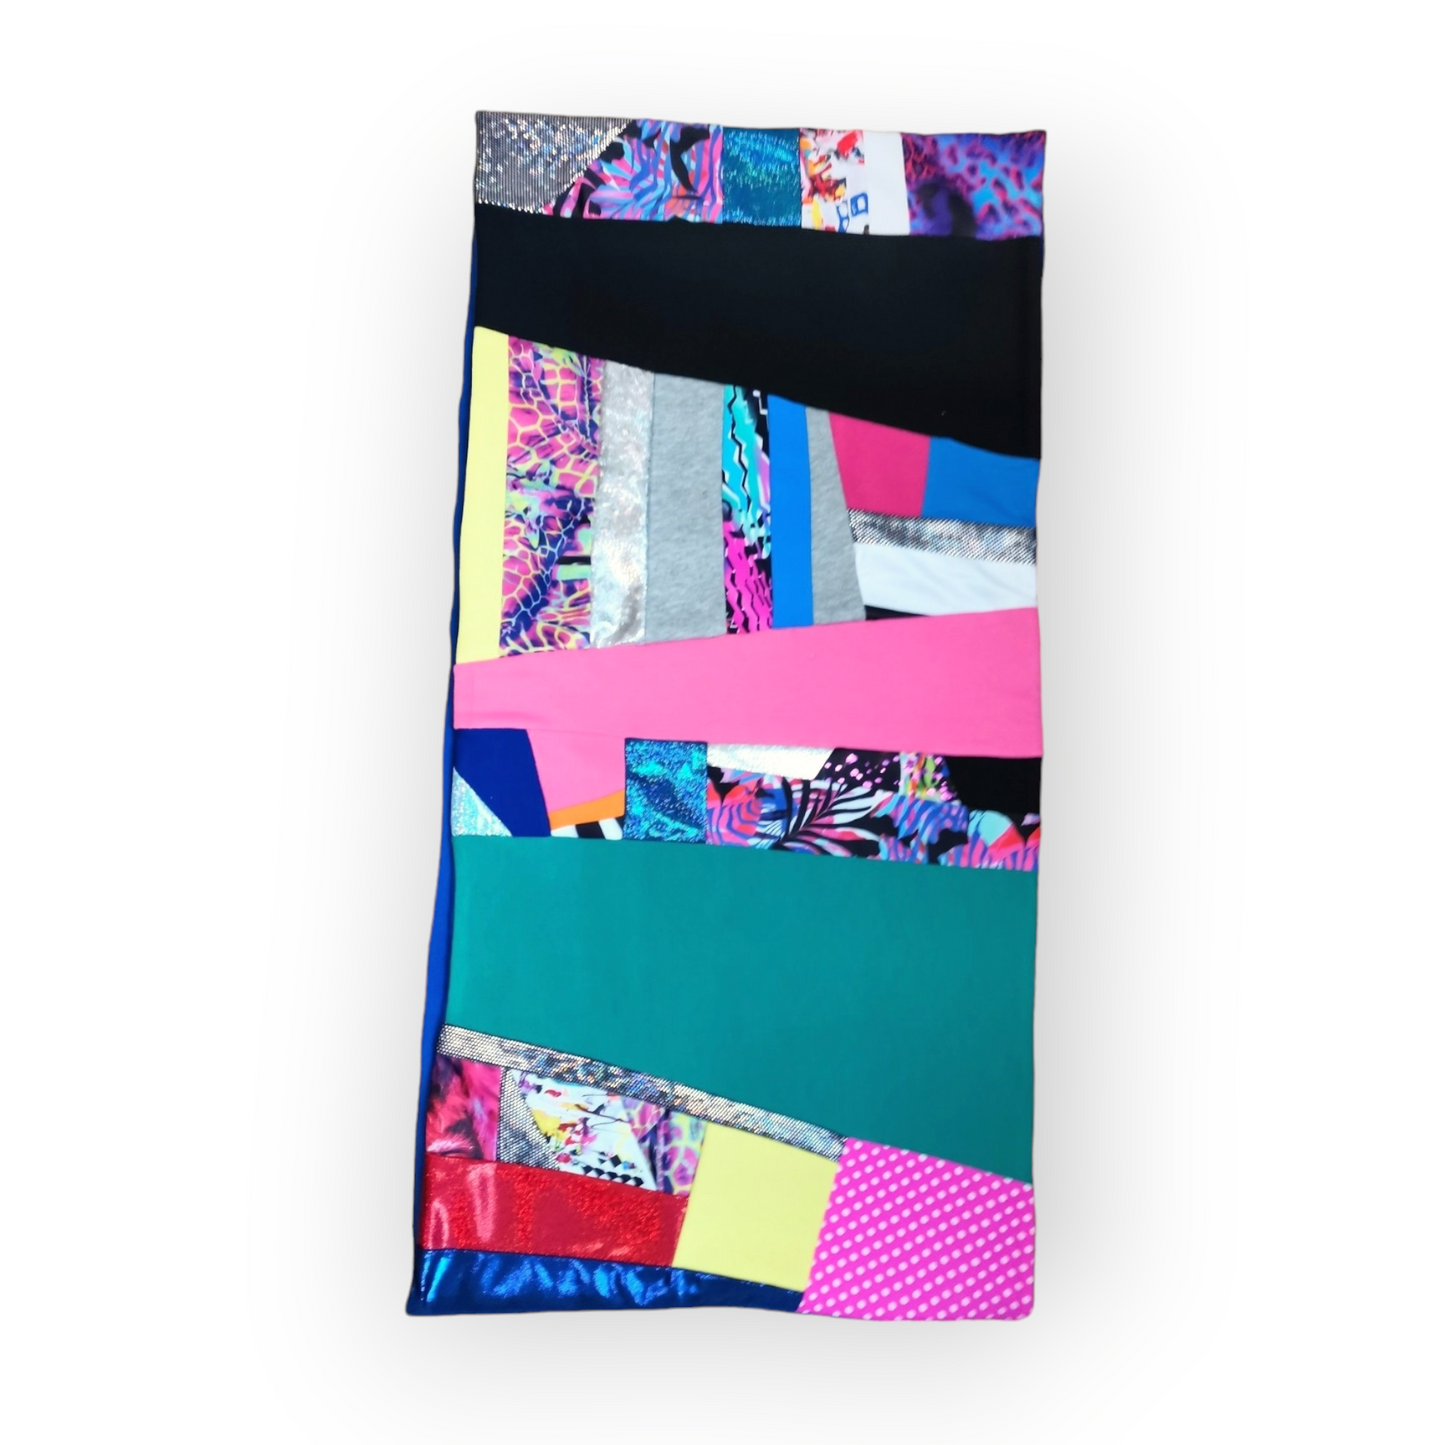 Large circular scarf made from recycled scrap fabrics.  Lined in blue fleece and including bright, printed, multi coloured patchwork panels and large colour blocks in turquoise, pink, black and blue. Pictured flat on white background. 